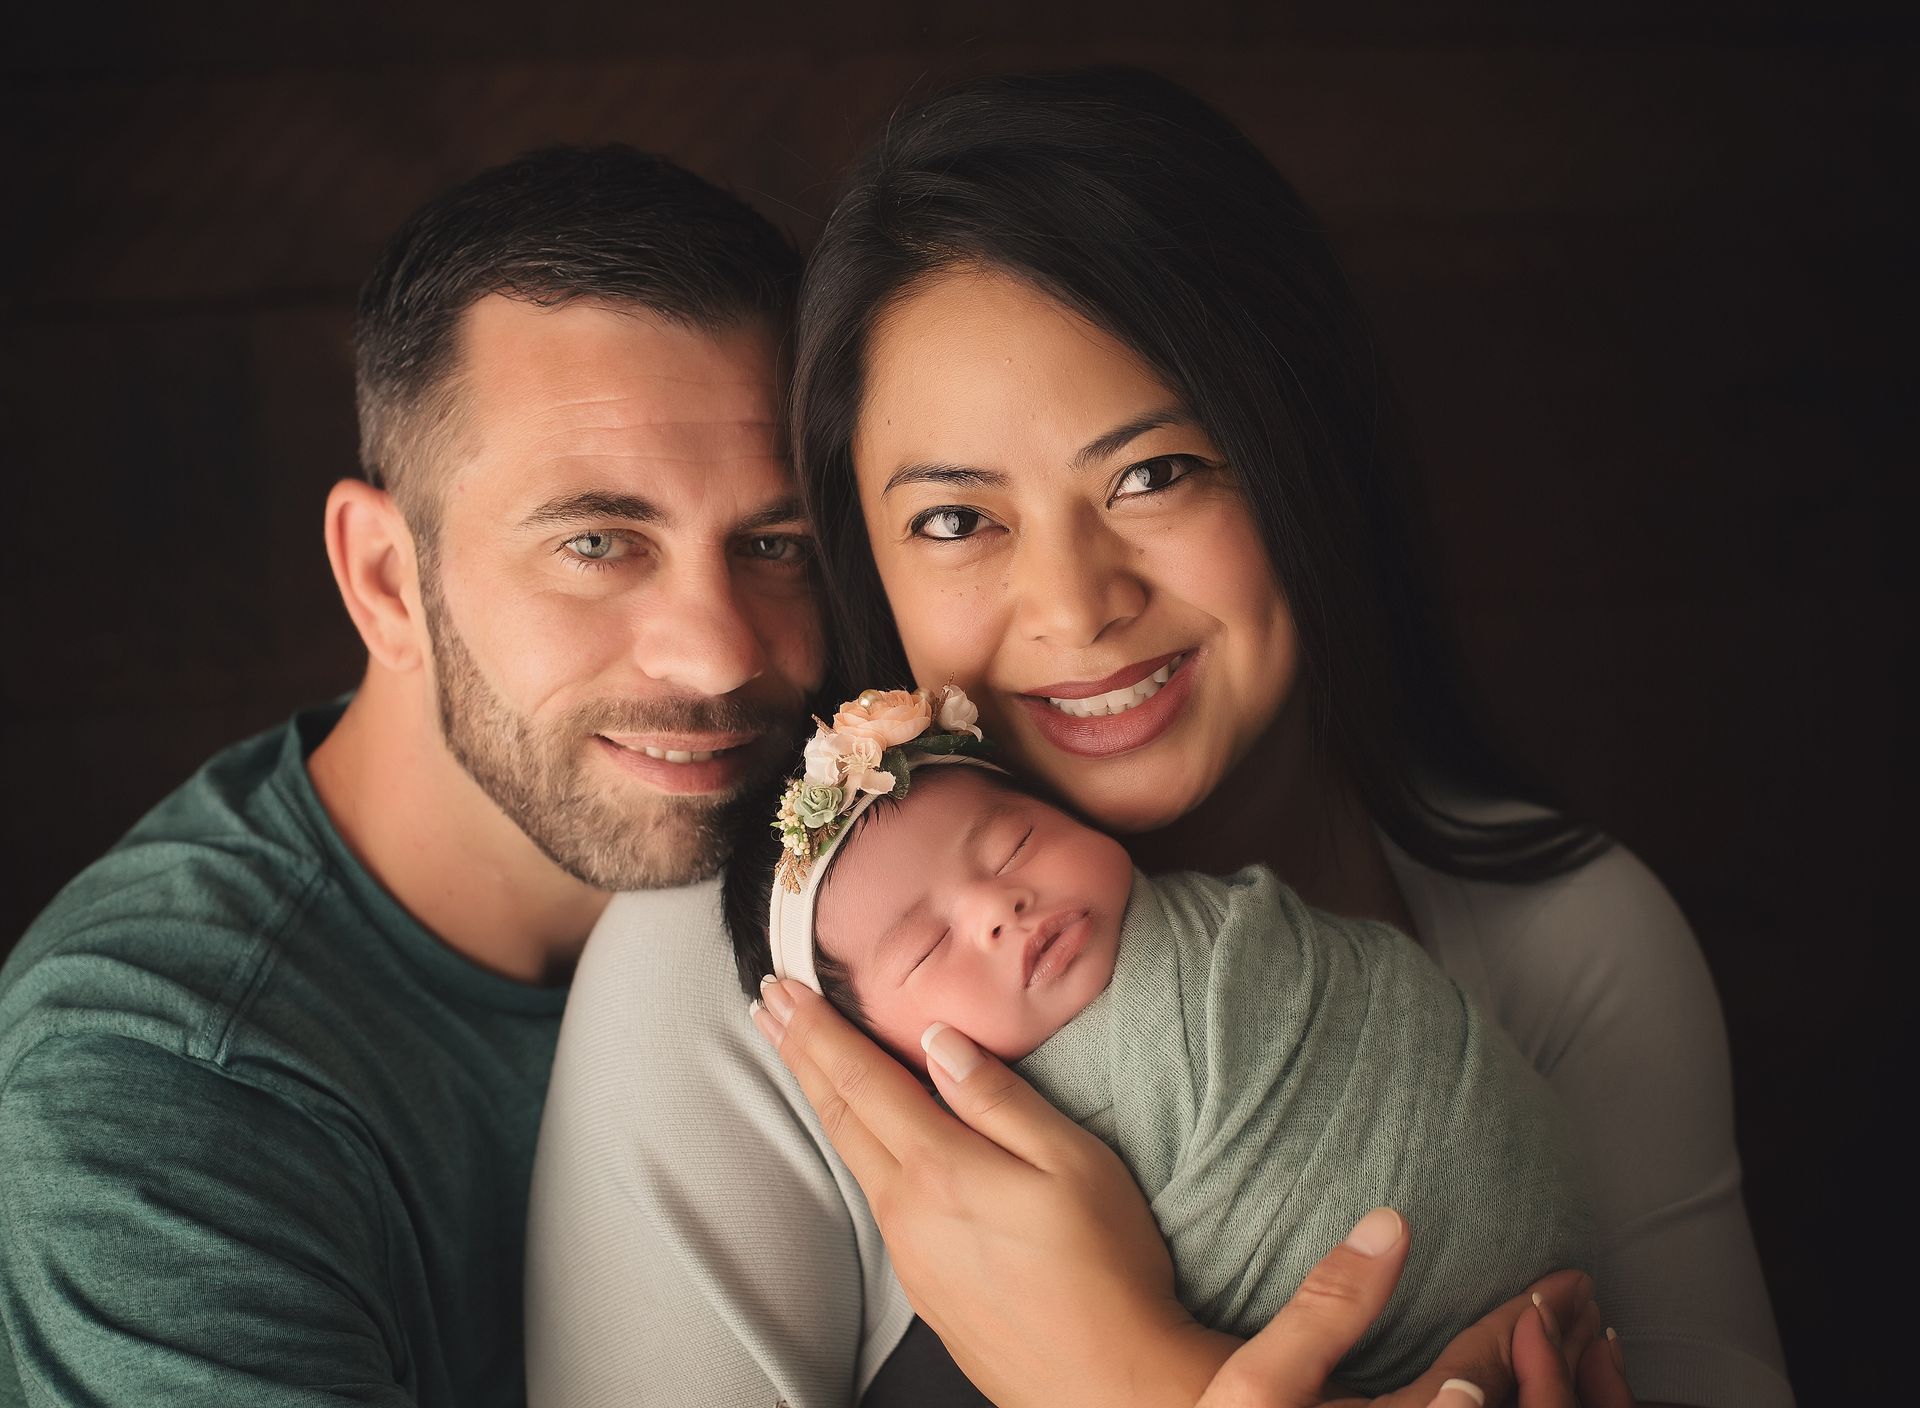 A man and woman are holding a newborn baby in their arms.